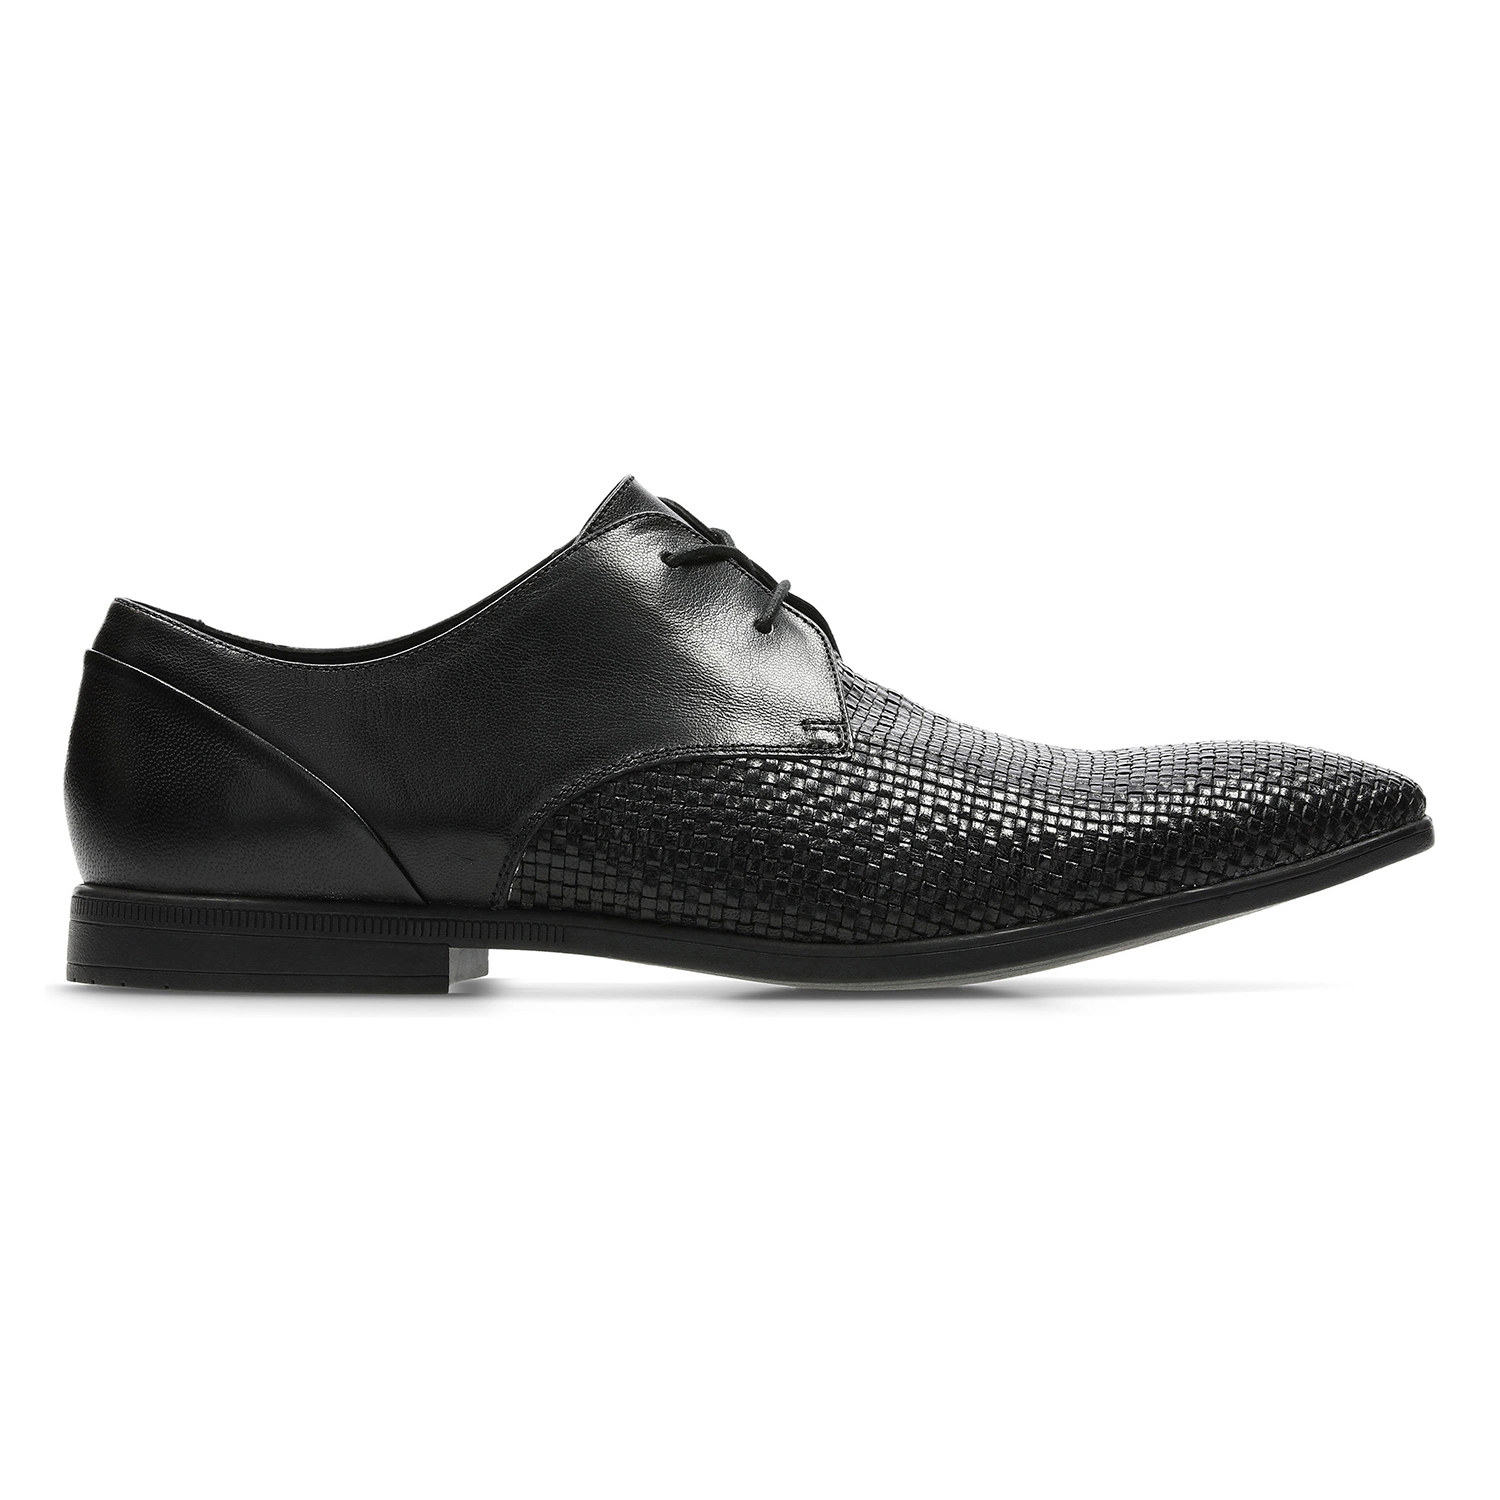 Clarks | Bampton Weave Black Leather Derby Shoes